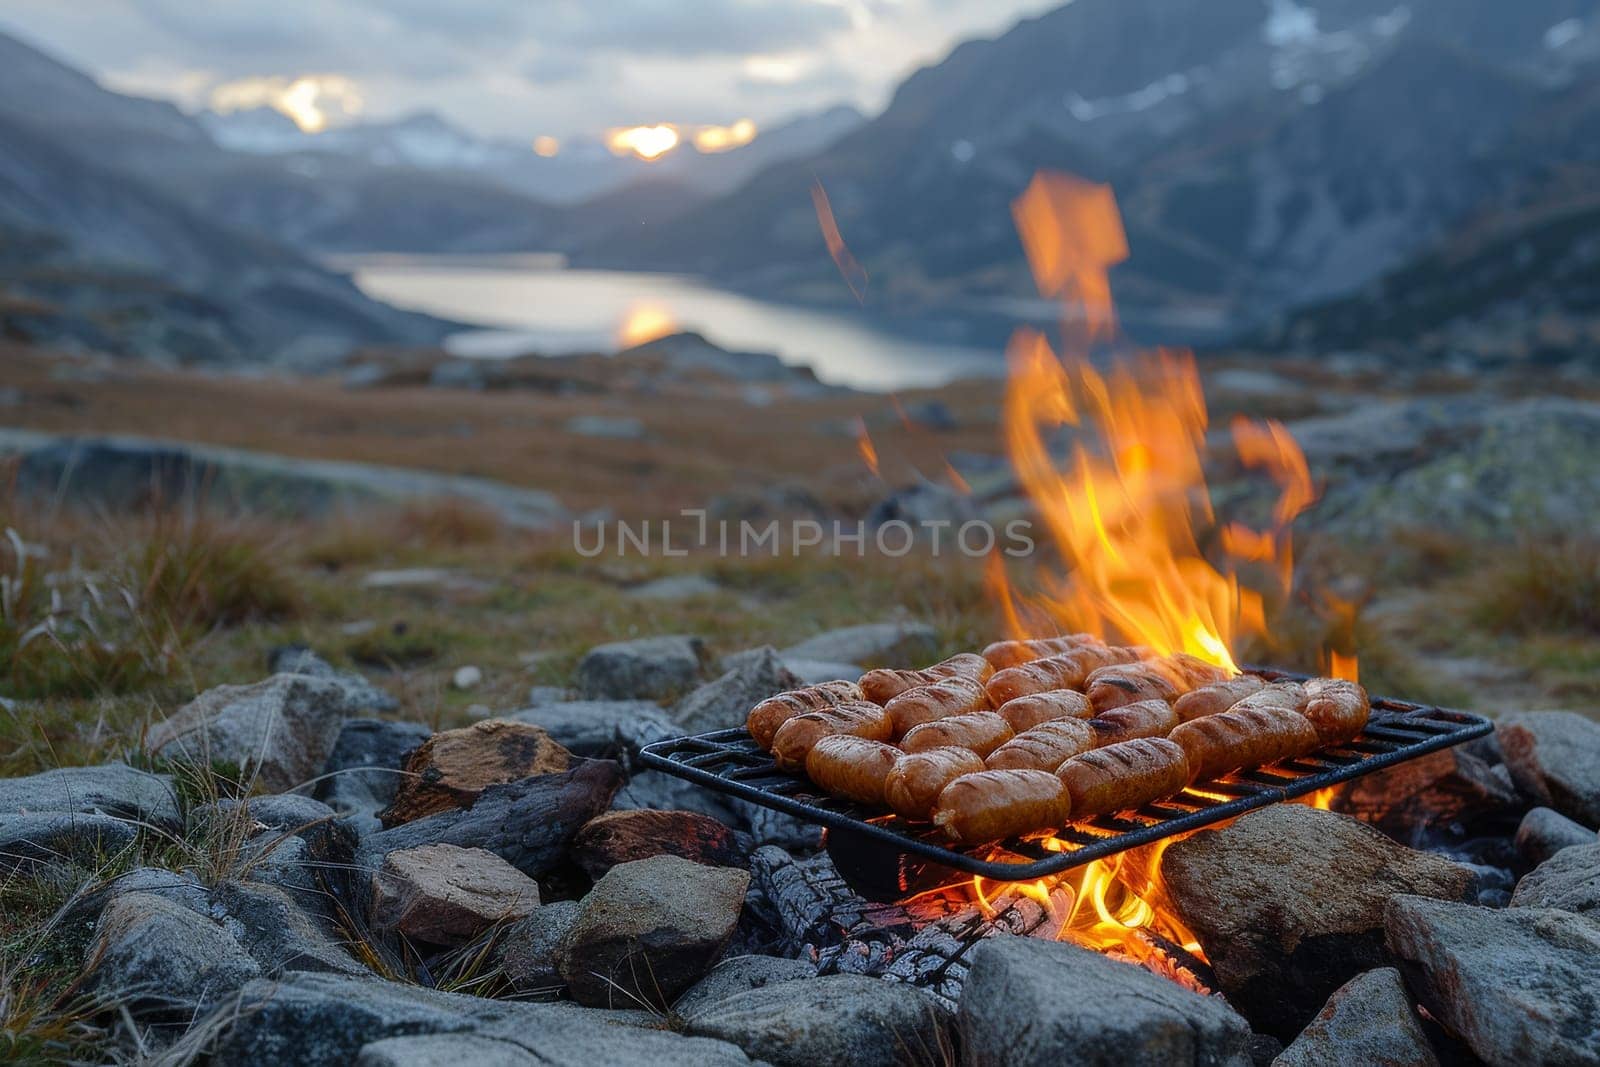 A fire is cooking hot dogs on a grill. The scene is set in a mountainous area with a lake in the background. The fire and the hot dogs create a cozy and inviting atmosphere